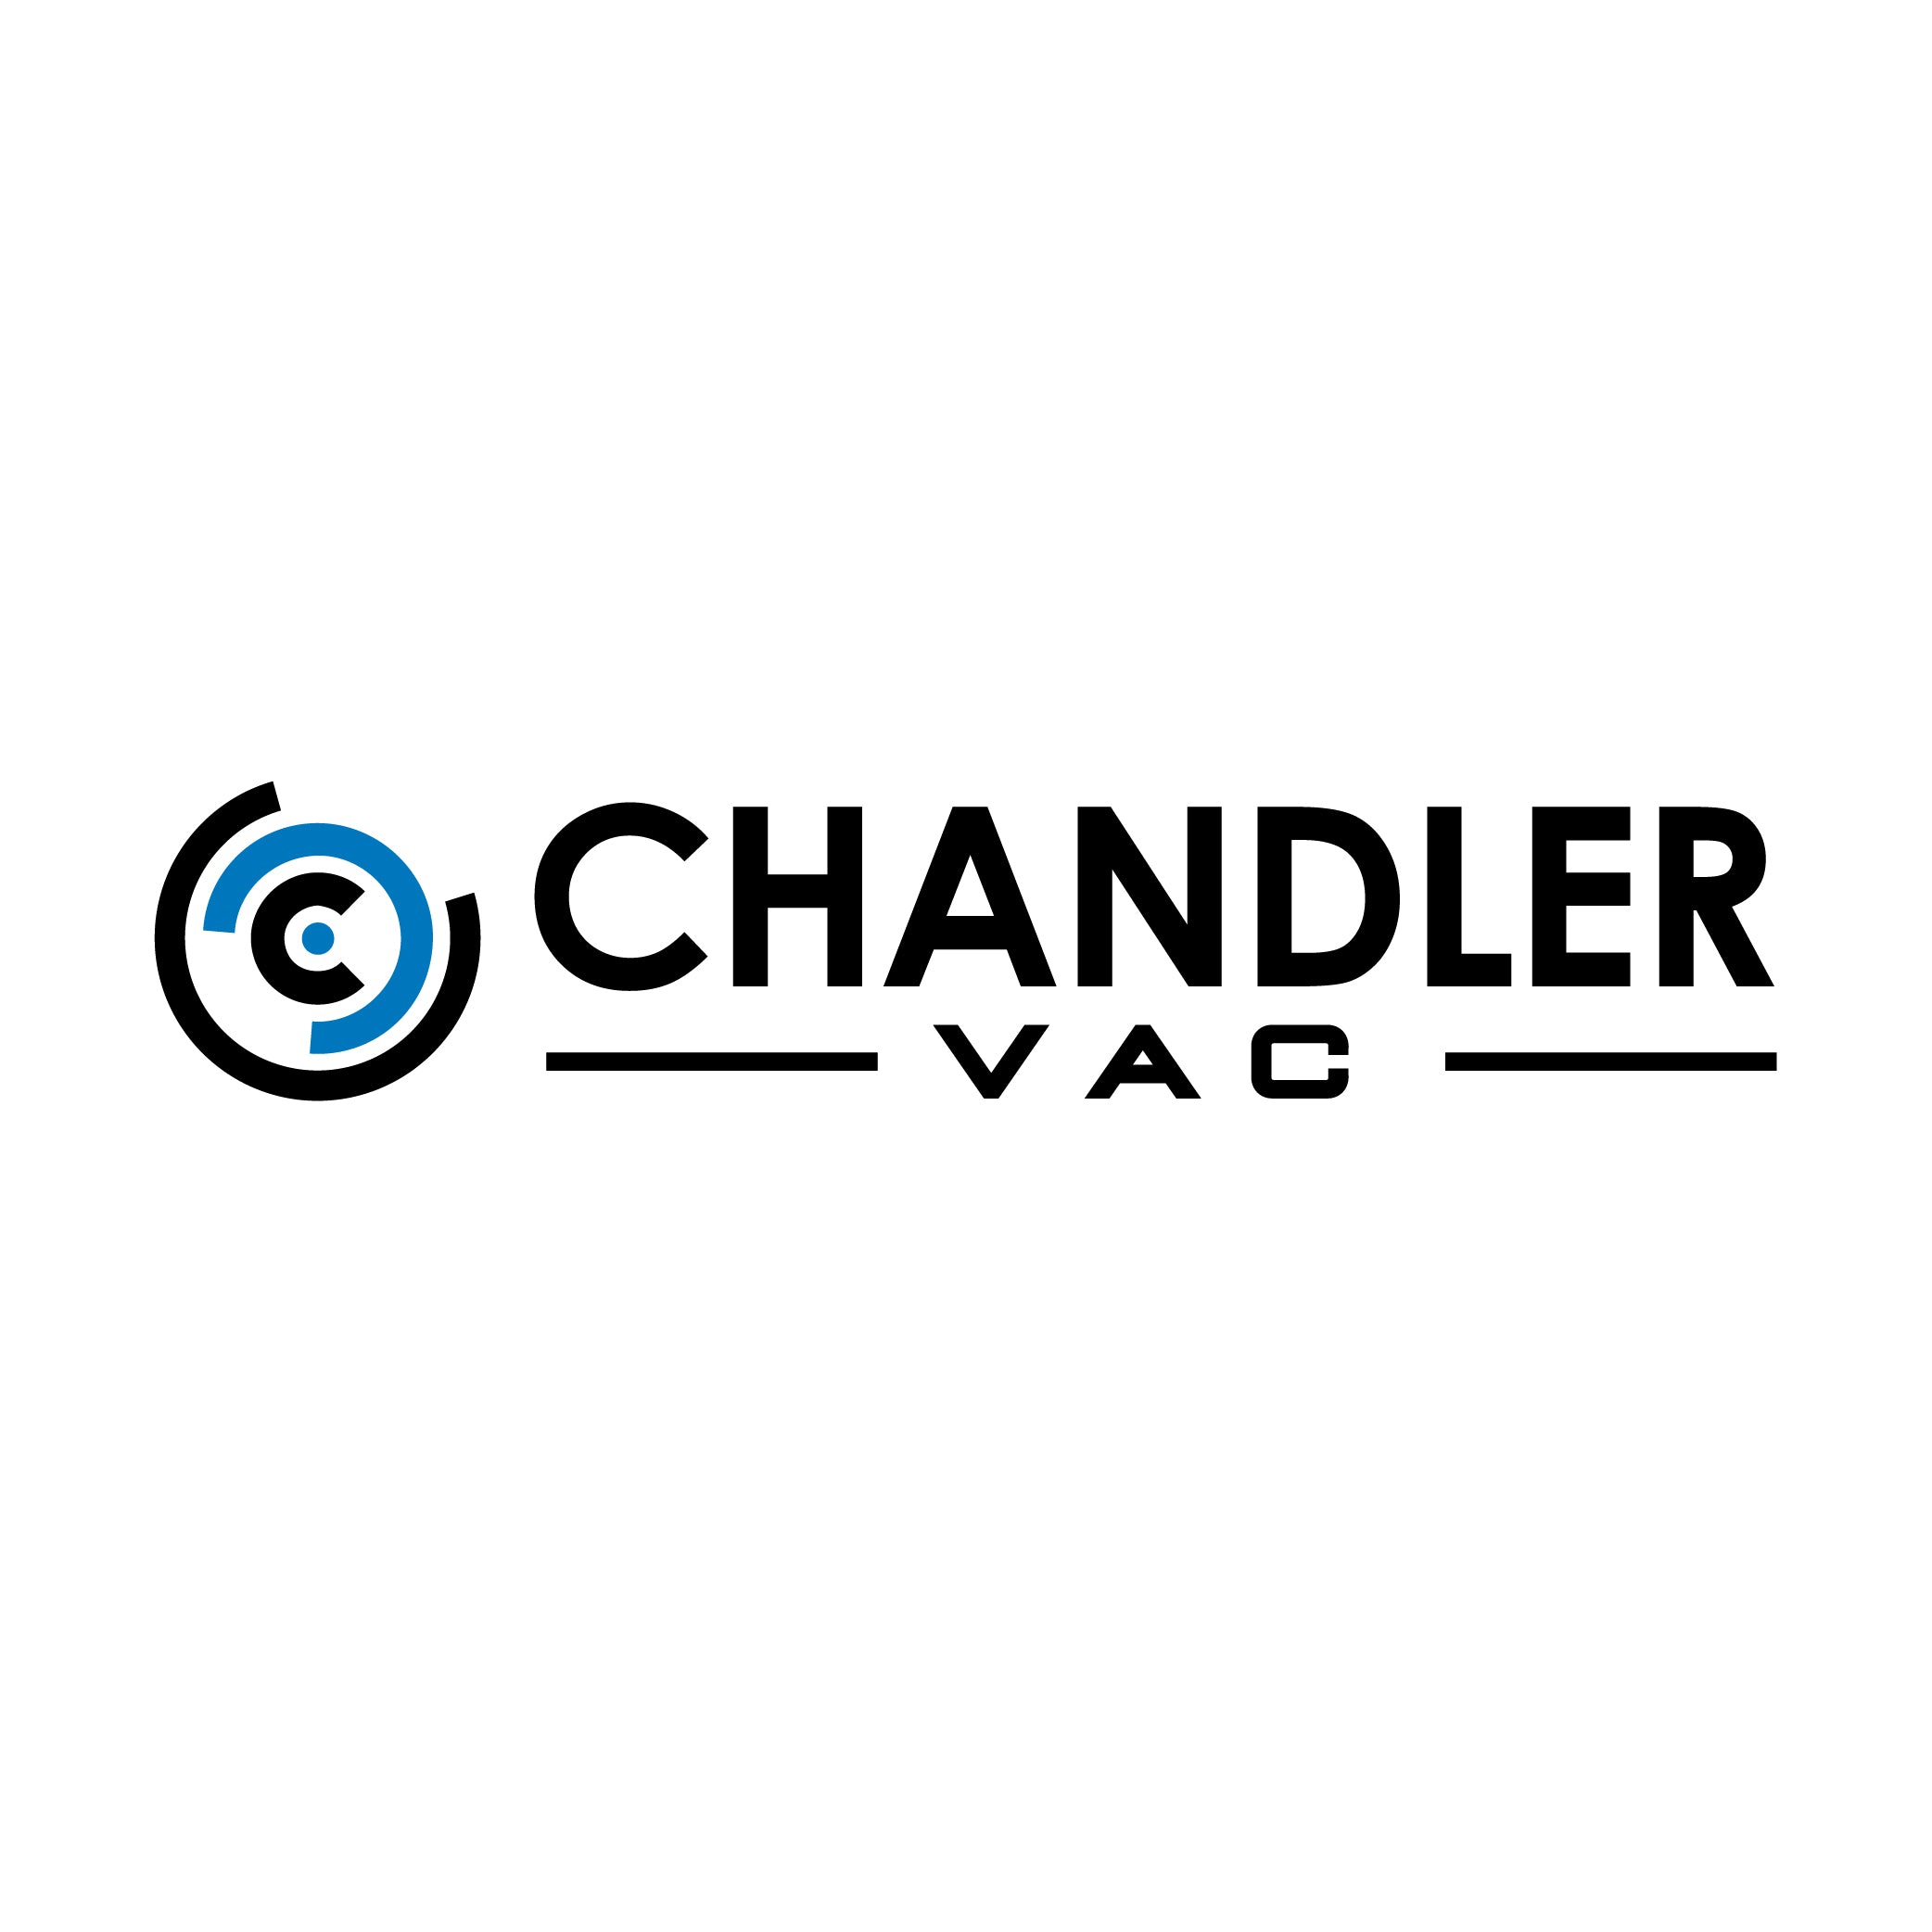 Chandler VAC 3 Shaft Gearbox (500 Series) With 1 1/4" Shafts 1:1 Ratio - 1/4" Keyway